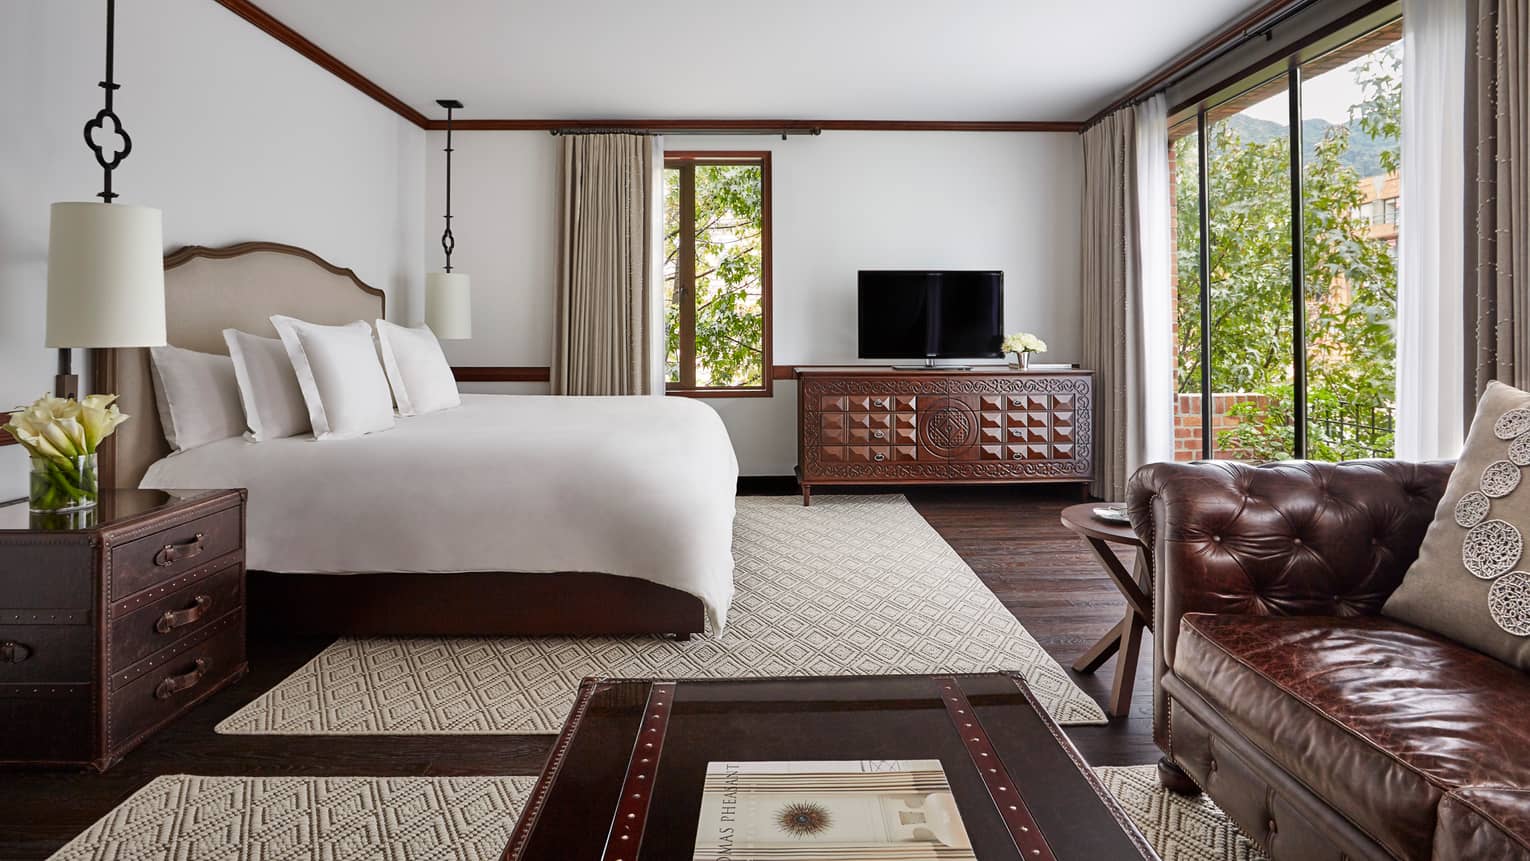 Executive Suite with bed with white linens, wood trunk-style coffee table and nightstand, large glass patio door